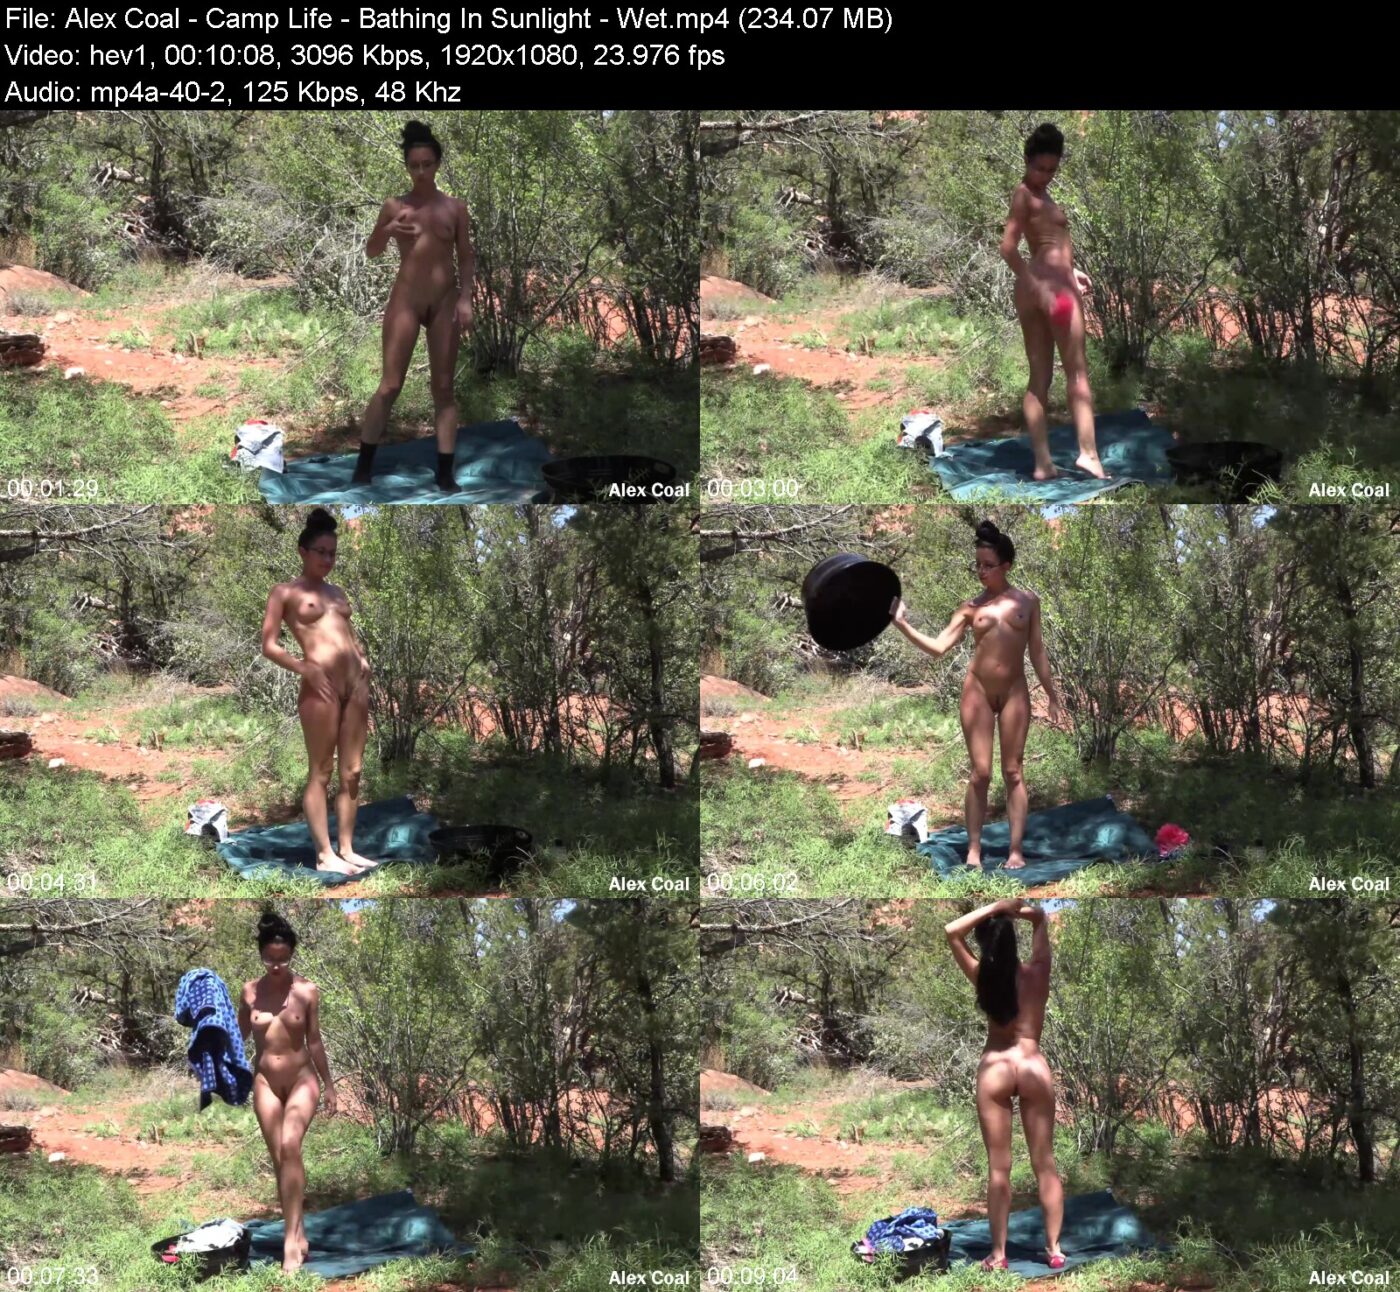 Actress: Alex Coal. Title and Studio: Camp Life – Bathing In Sunlight – Wet